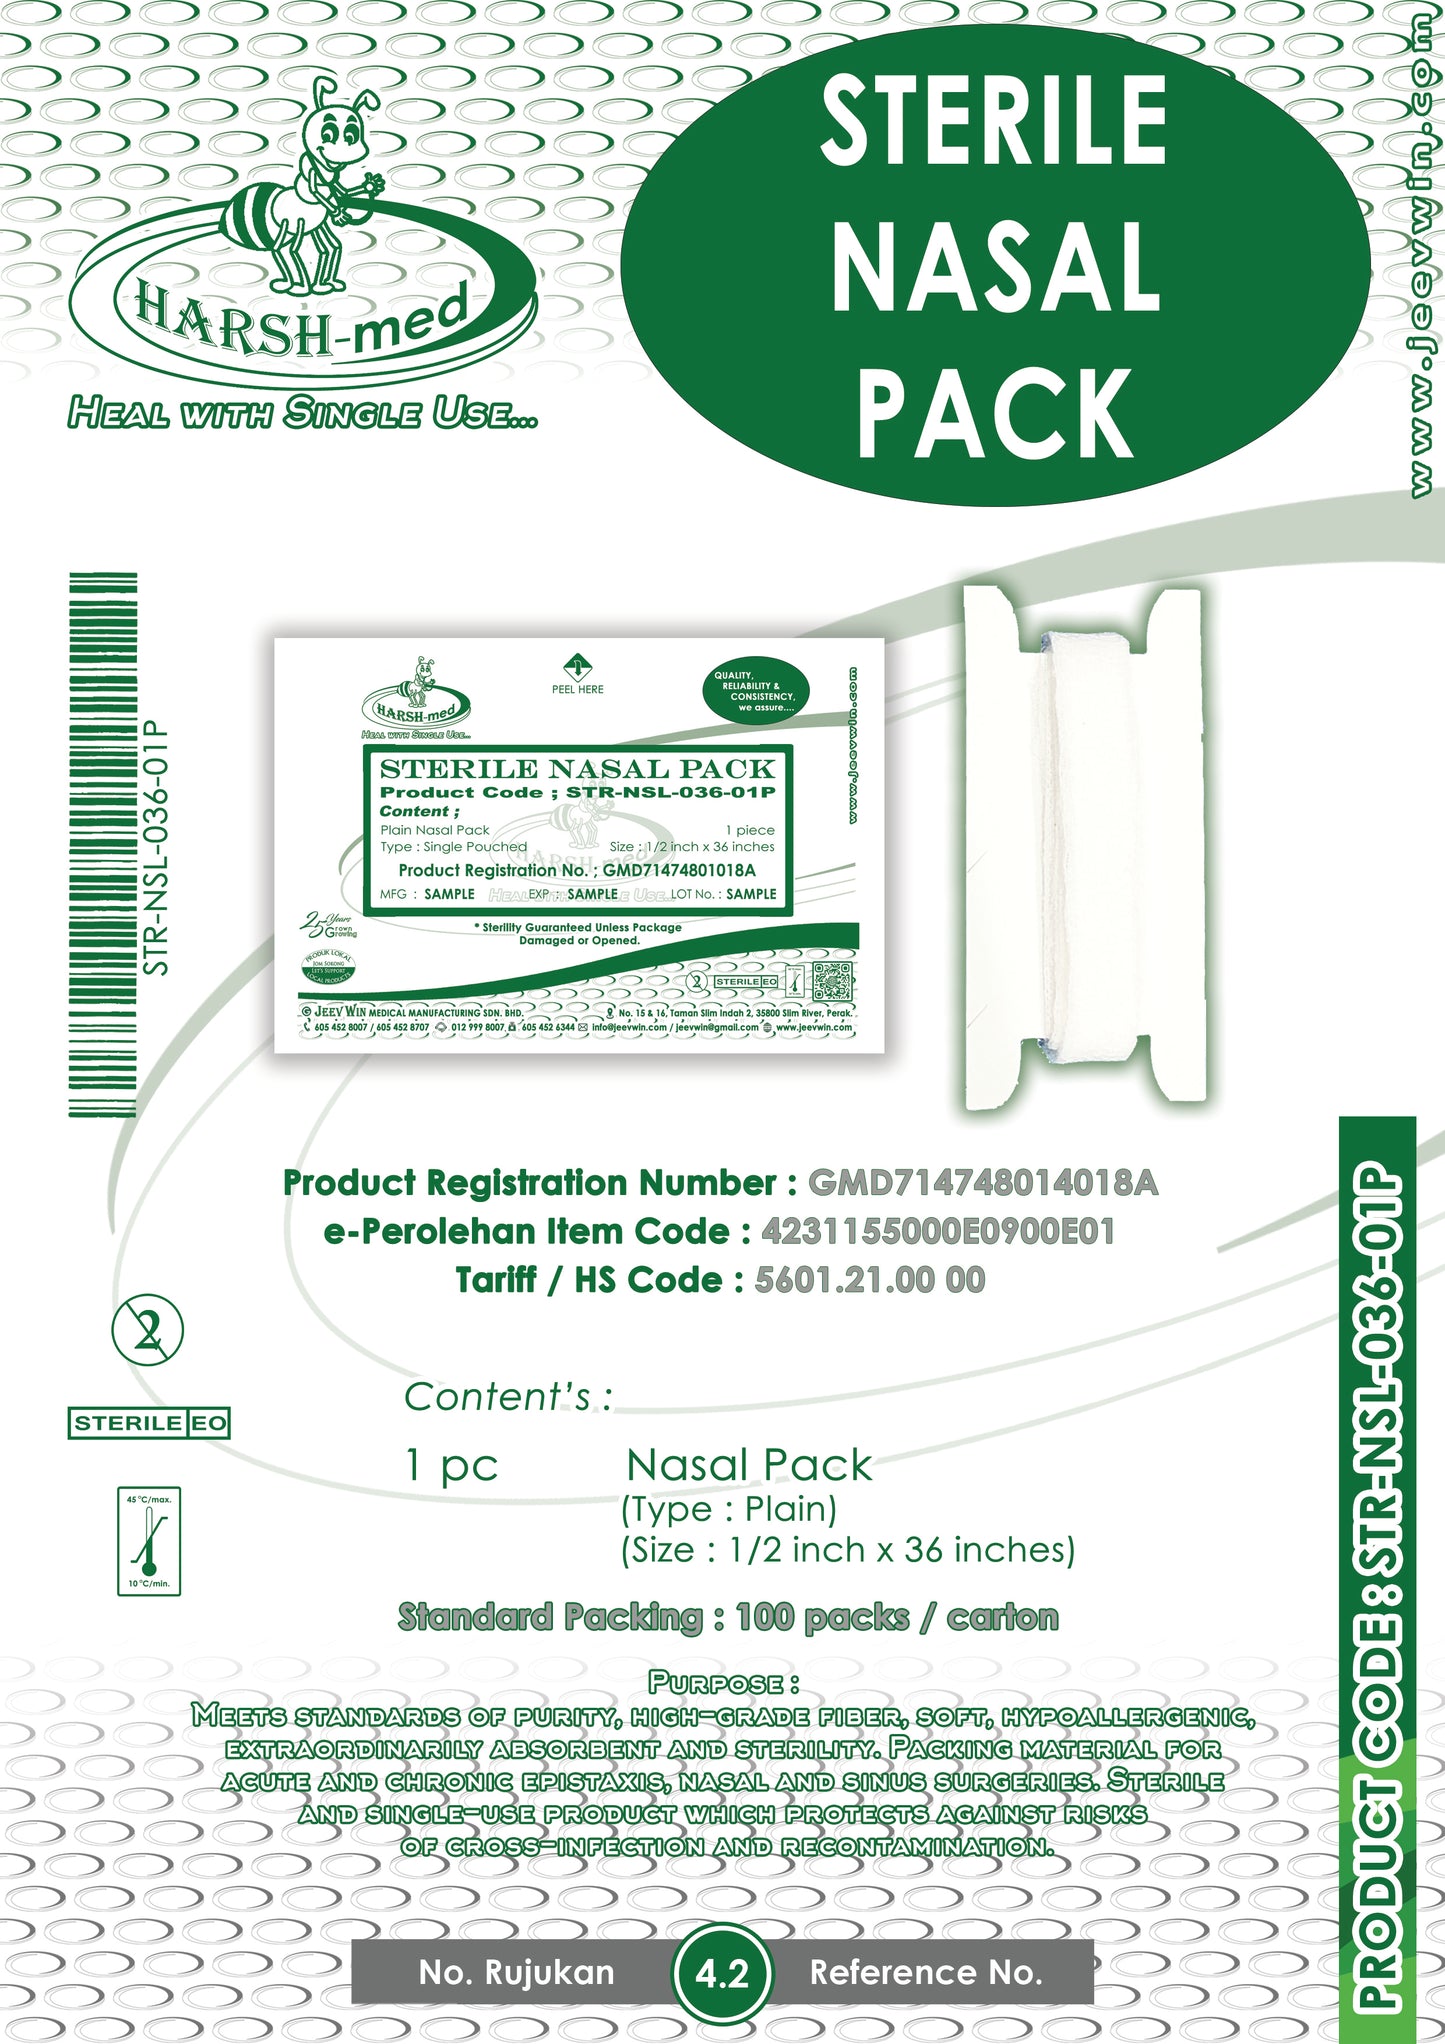 STERILE NASAL PACK - 36 inches